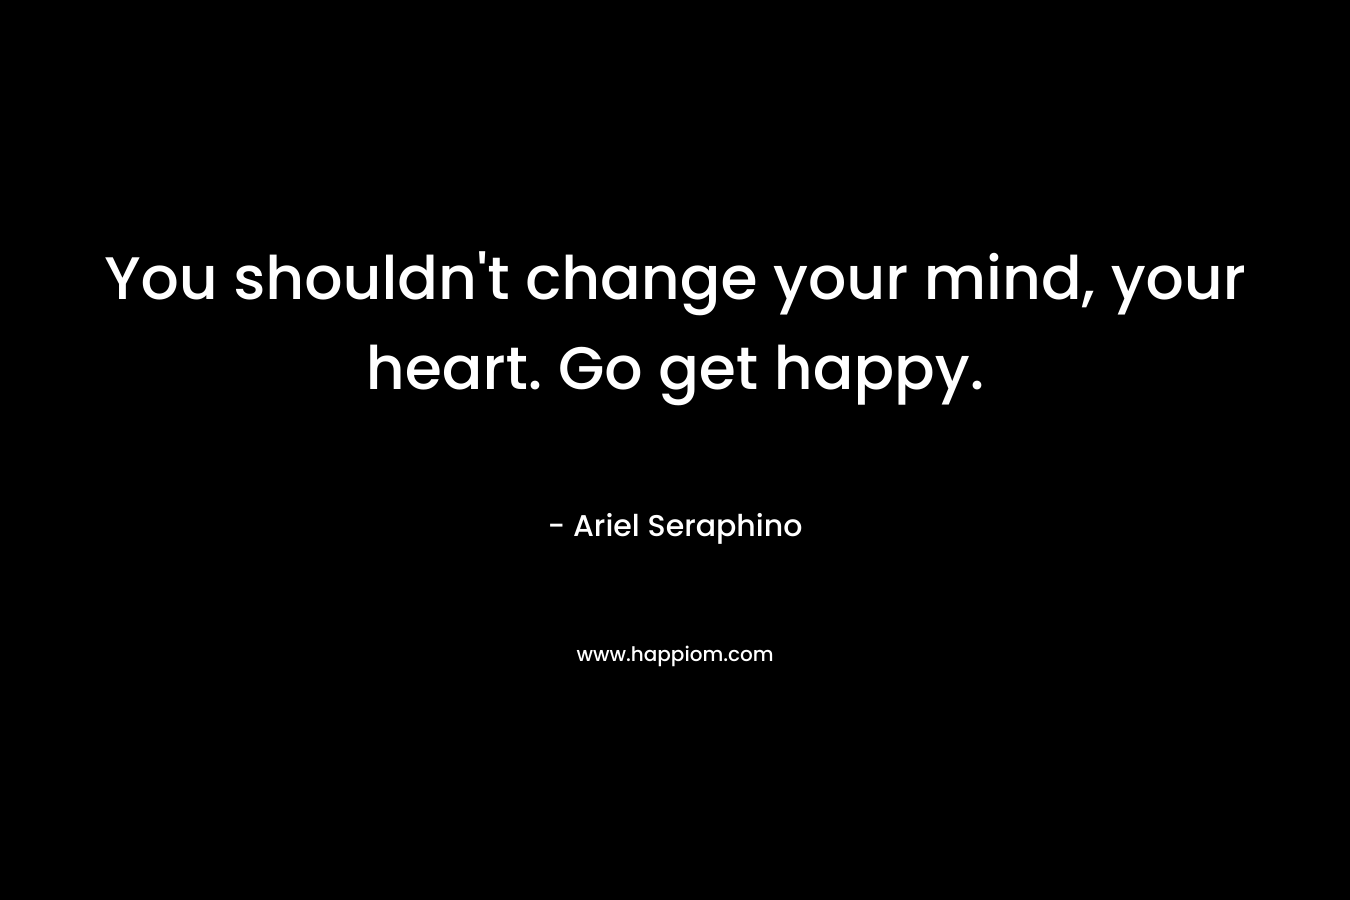 You shouldn't change your mind, your heart. Go get happy.